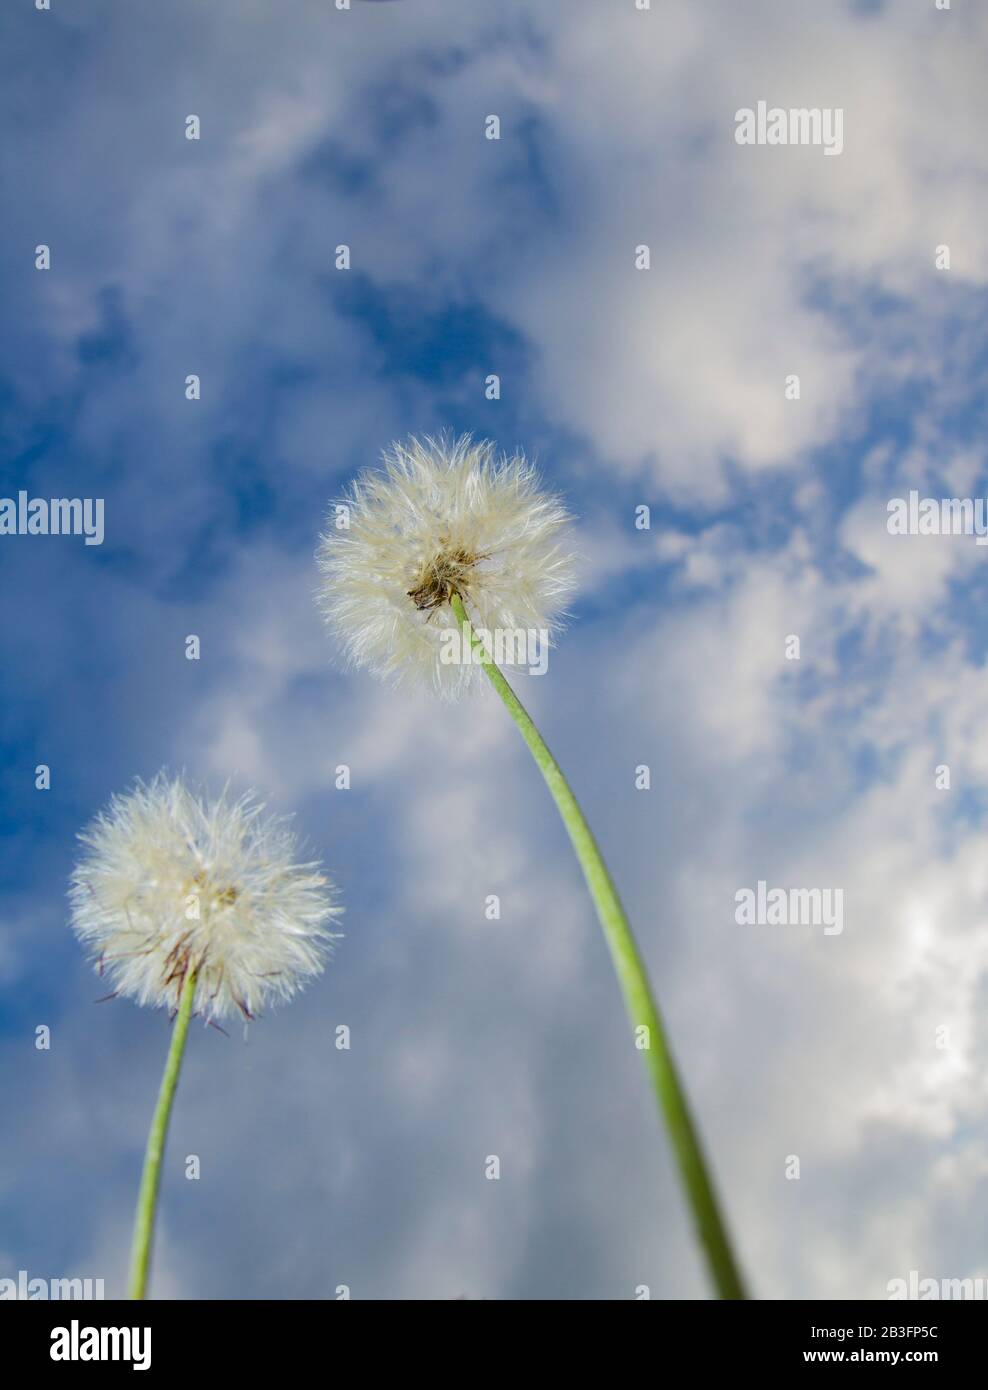 two white dandelion (taraxacum officinalis) or erythrospermum plant flower against a blurry blue sky and clouds ,low angle Stock Photo